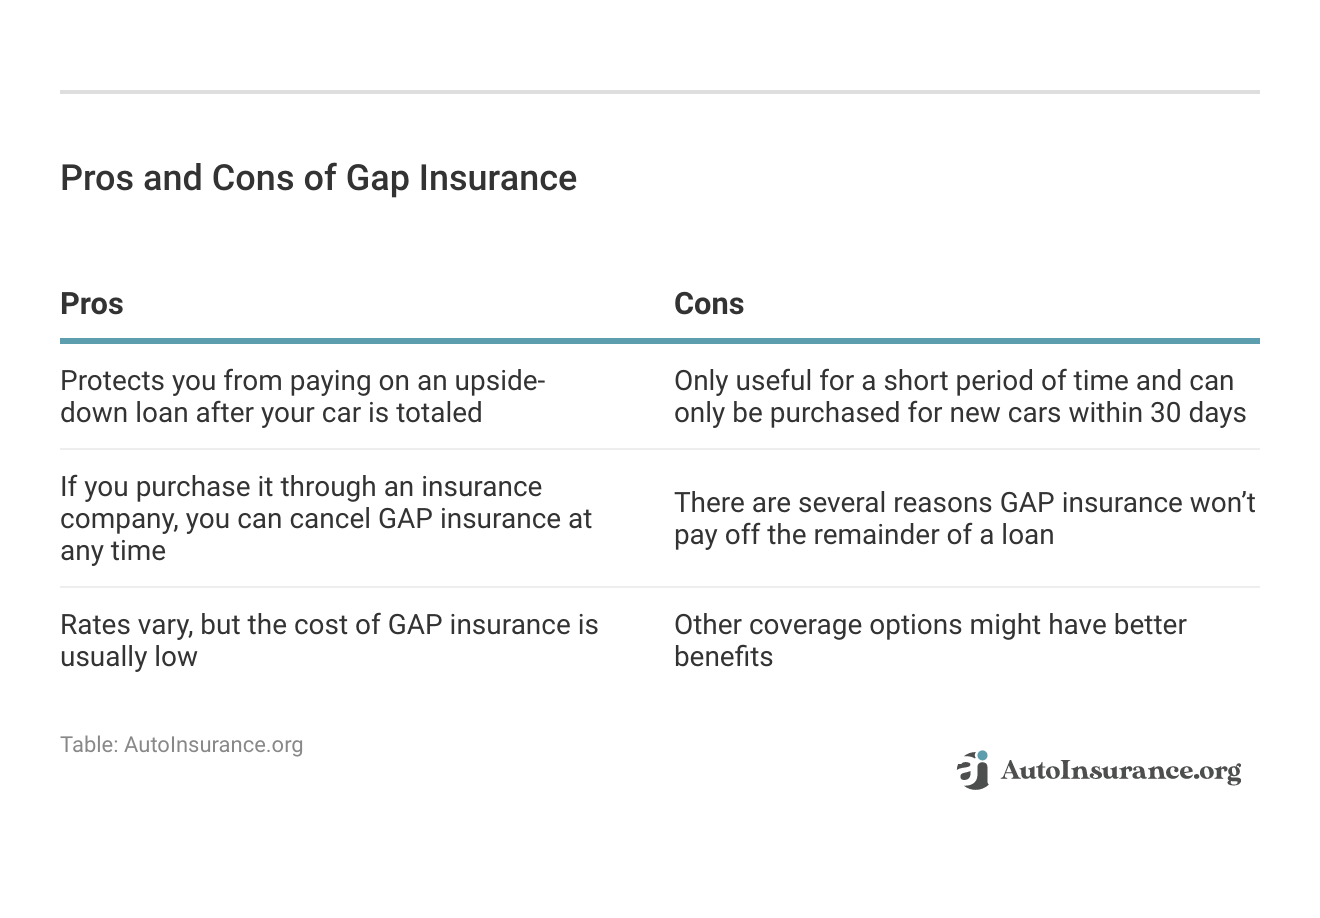 <h3>Pros and Cons of Gap Insurance</h3>